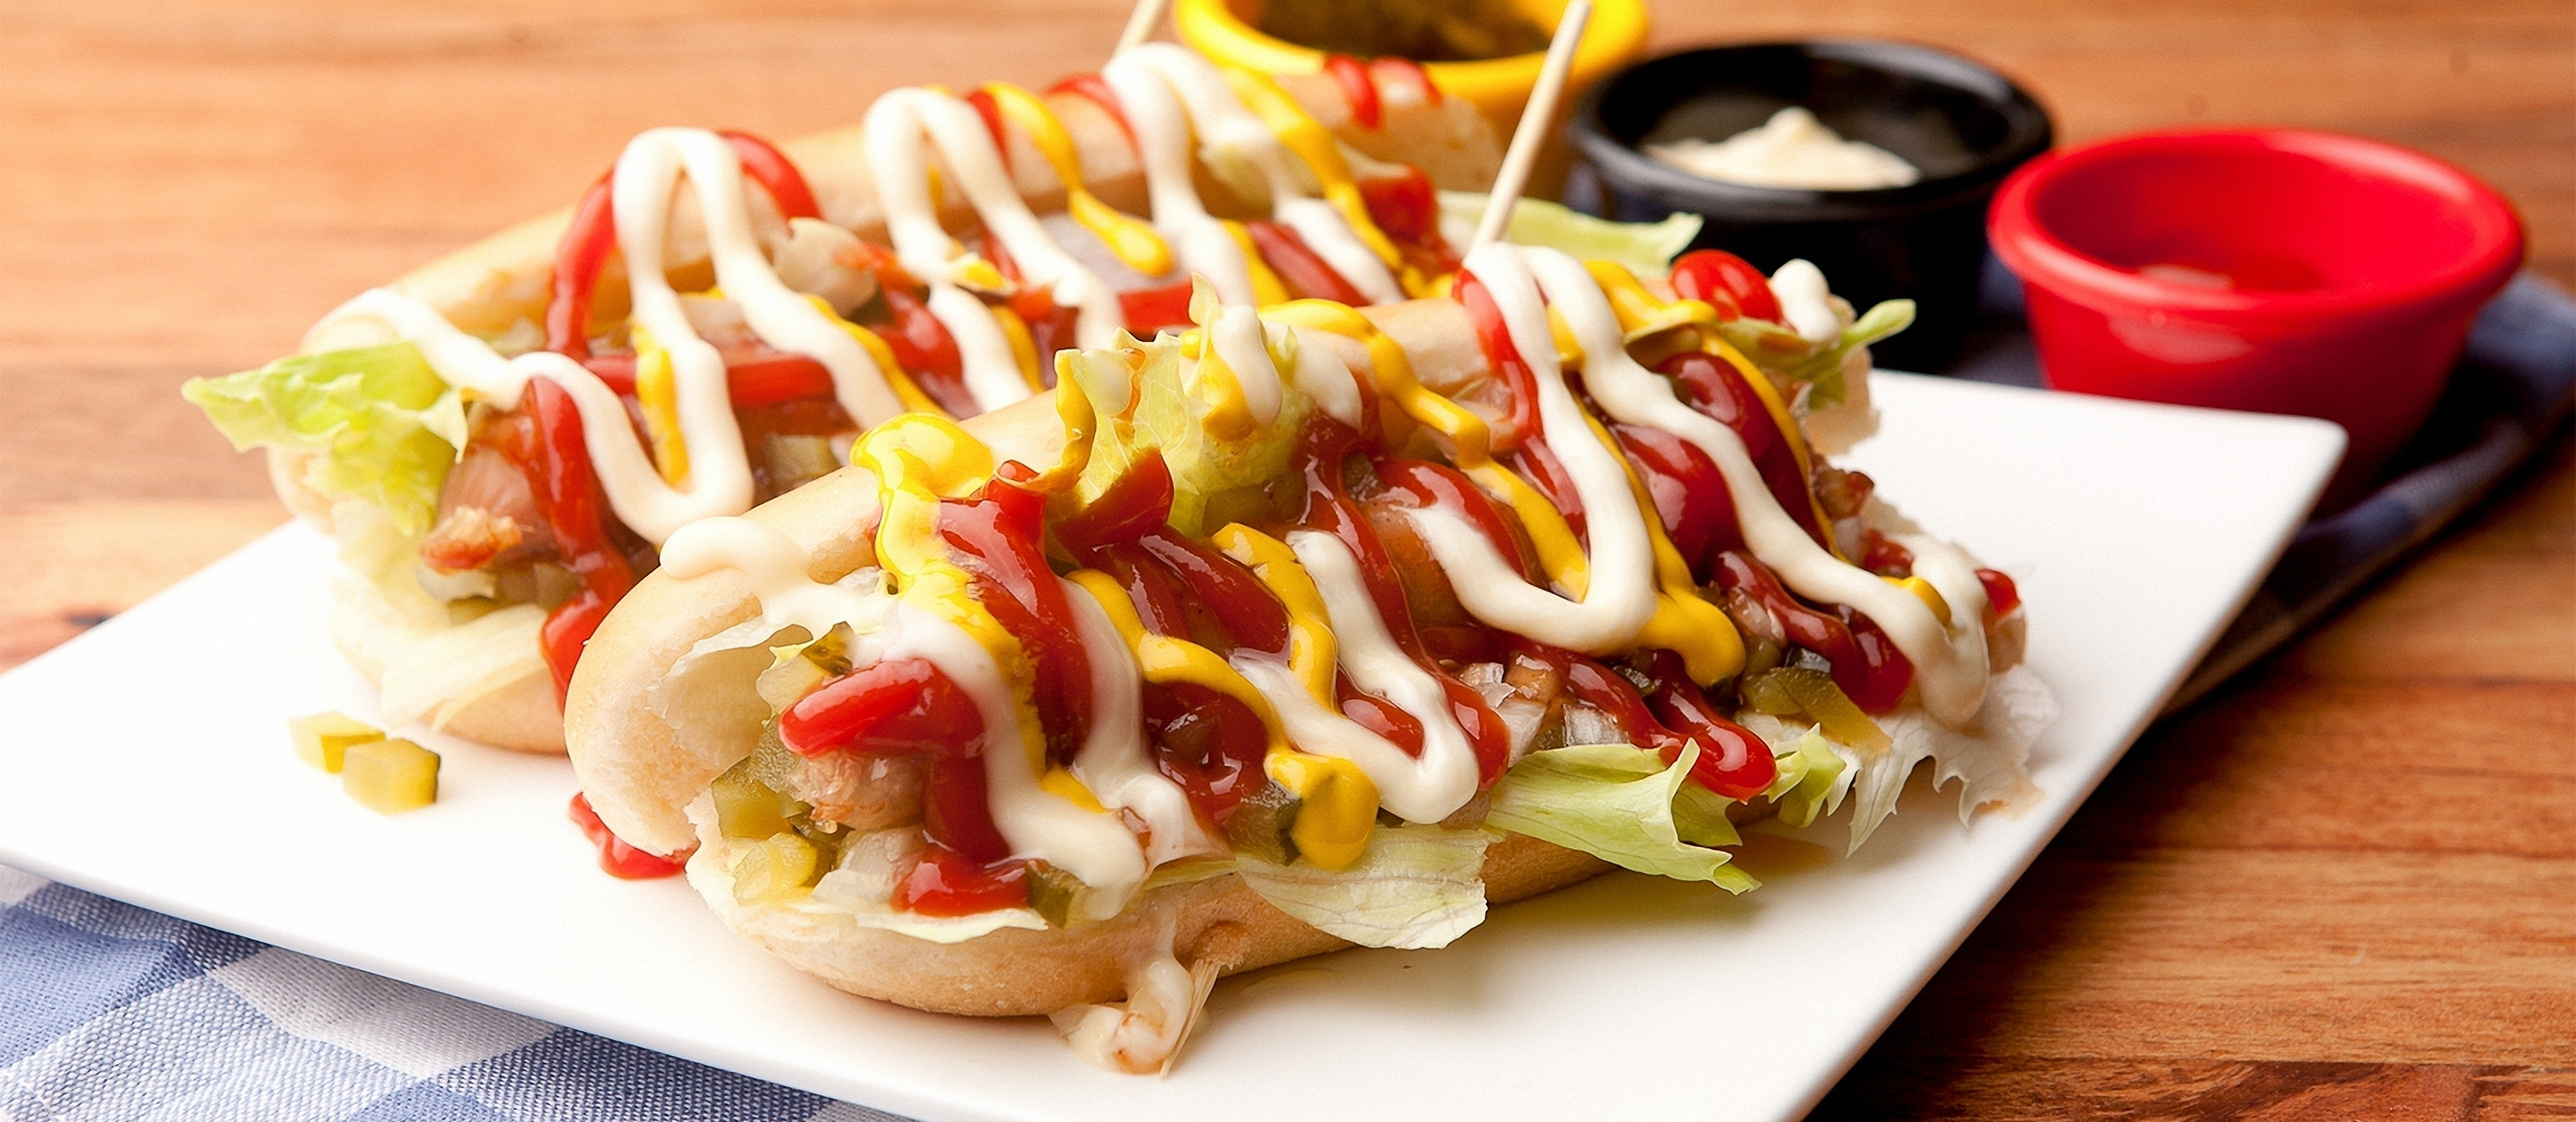 Perro caliente Traditional Hot Dog From Colombia TasteAtlas.